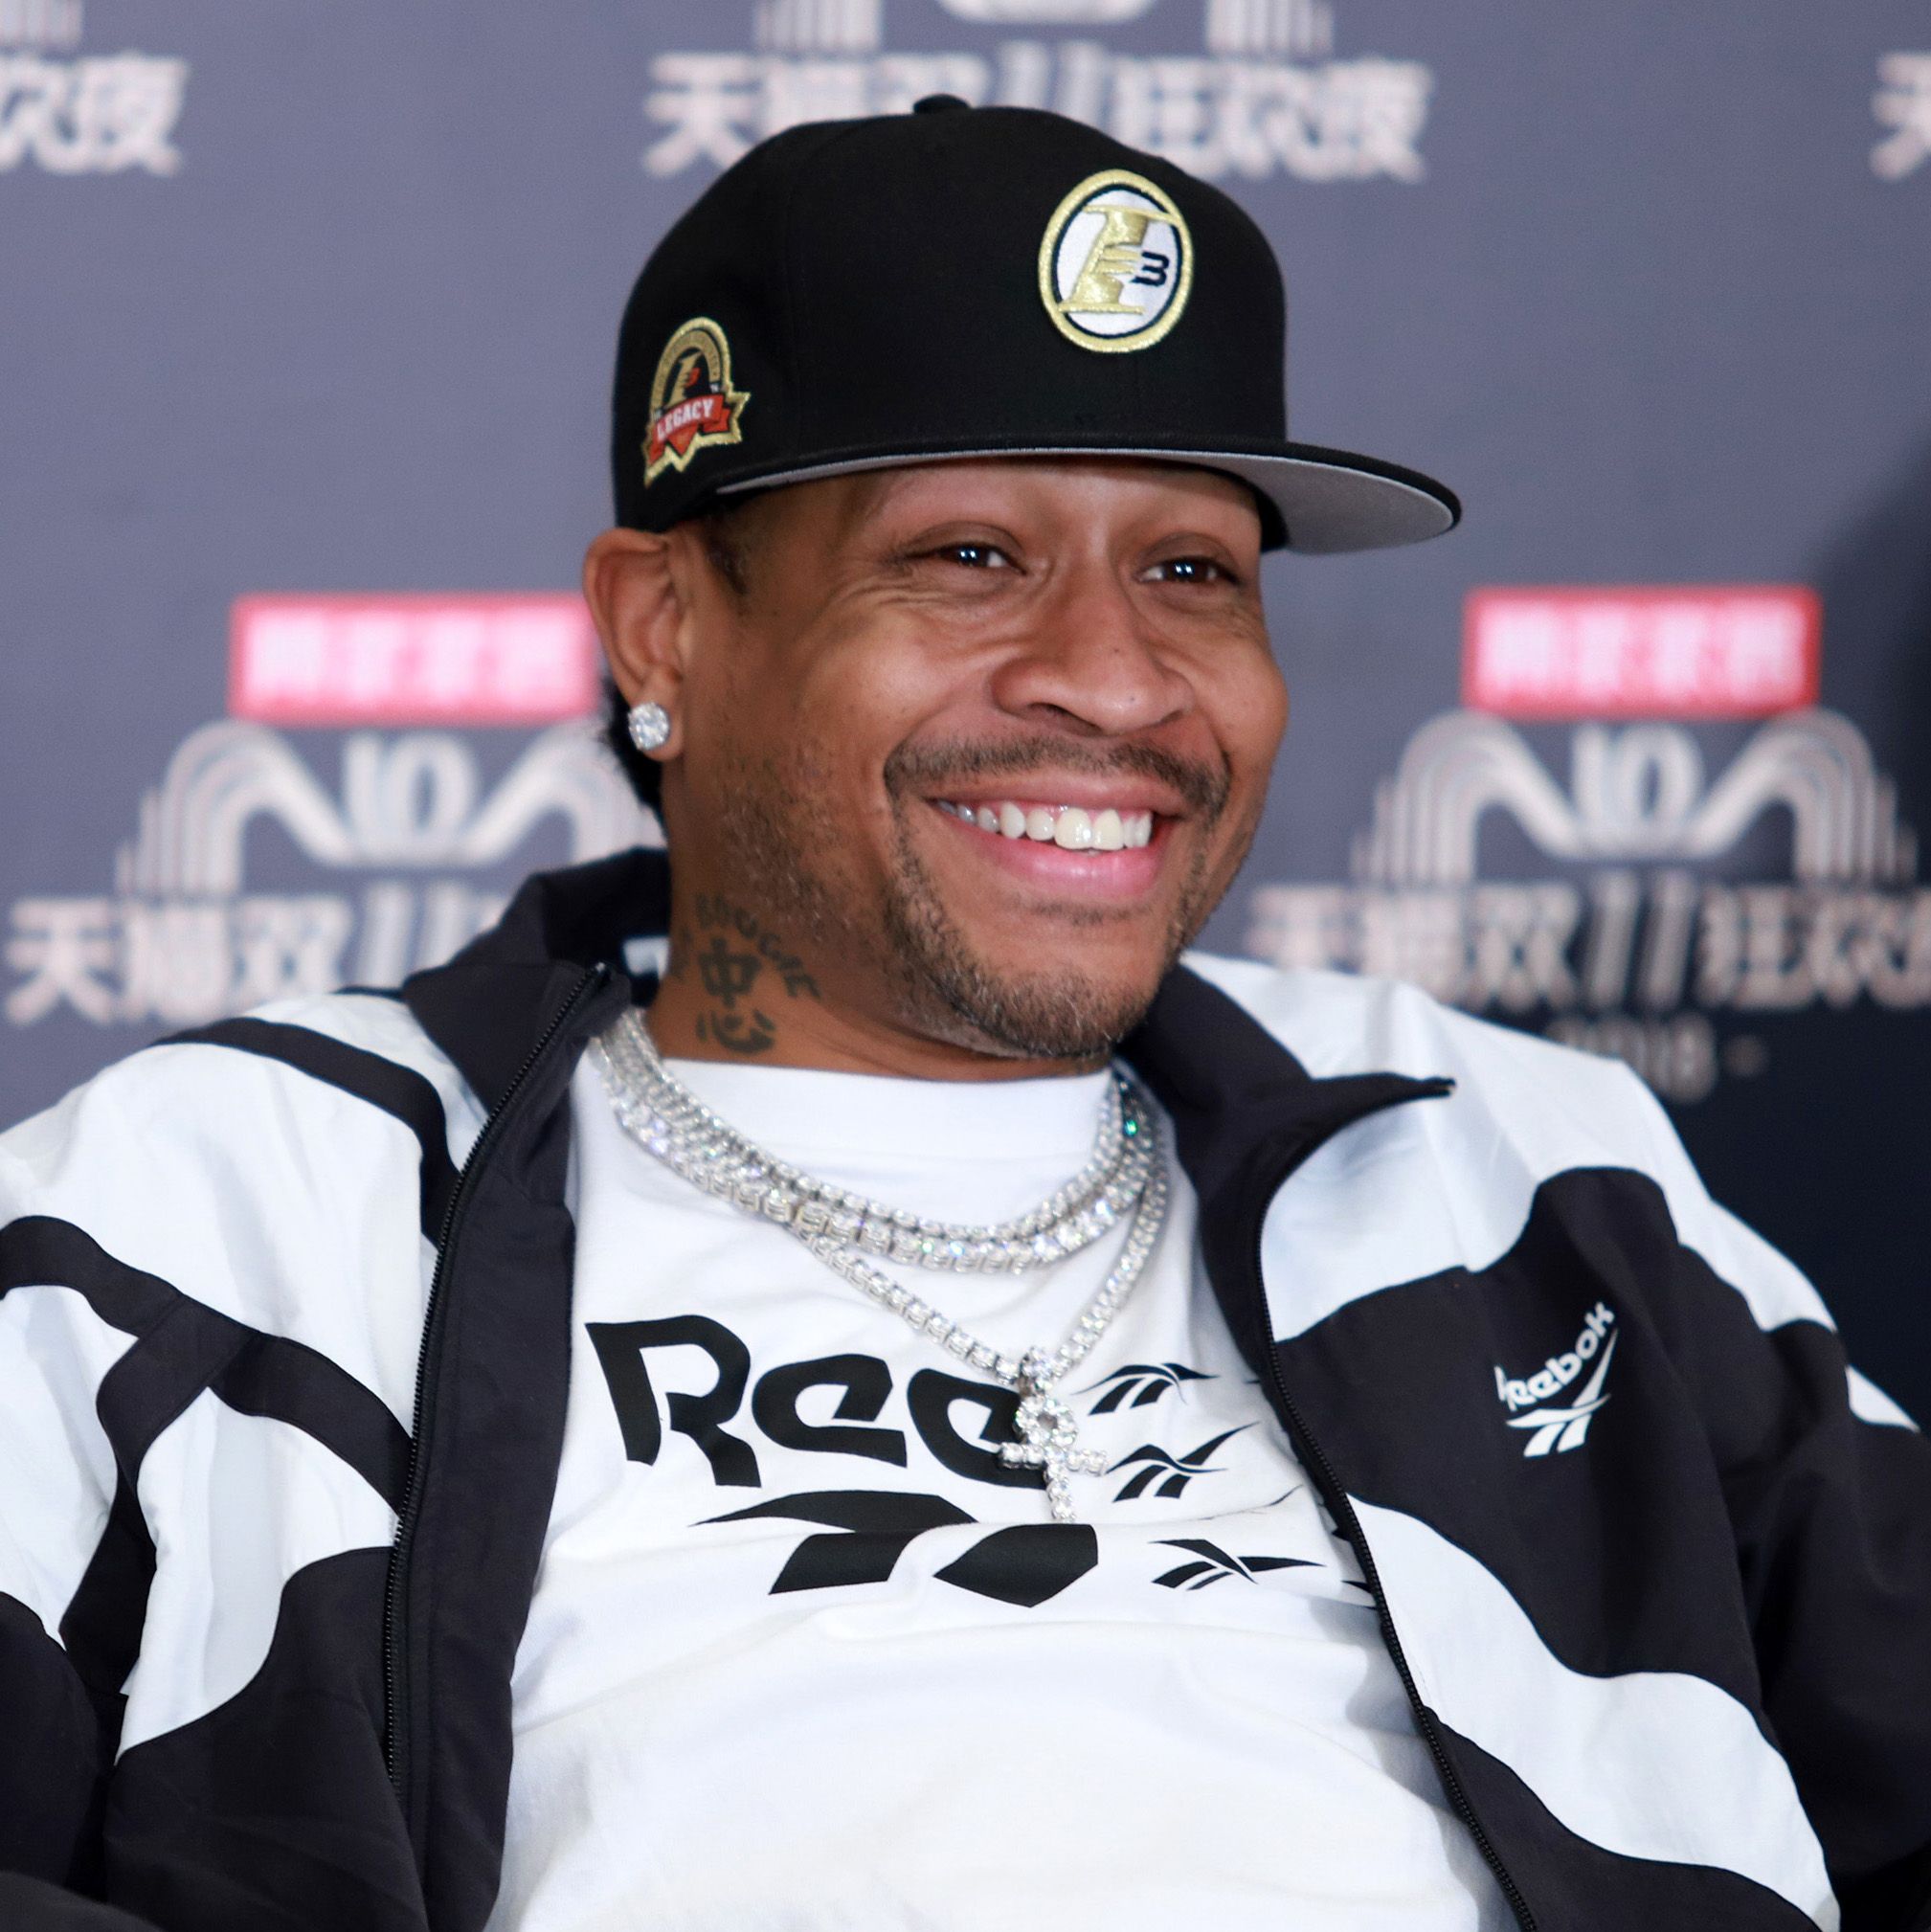 Allen Iverson Net Worth in 2023 How Rich is He Now? - News